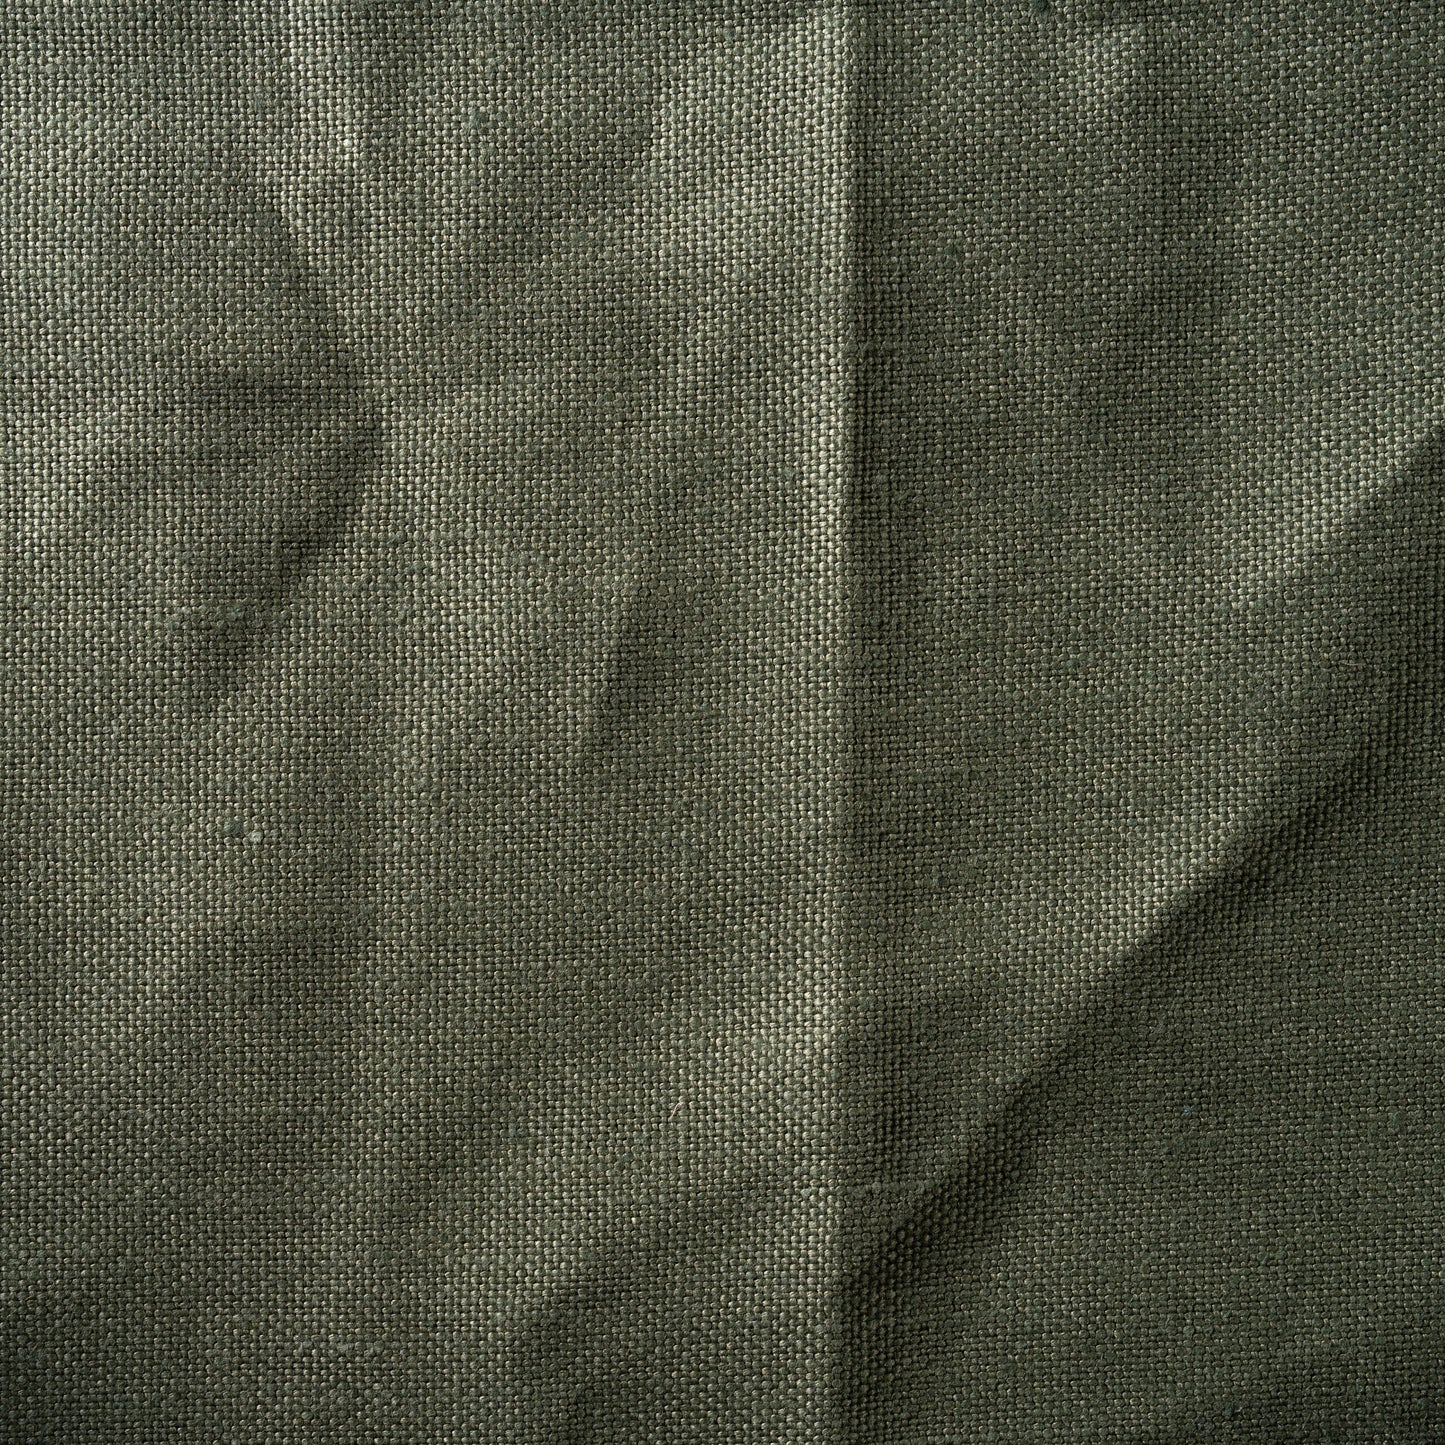 12 oz/sq yard 100% Upholstery/ Slipcover Weight Linen in Woodland